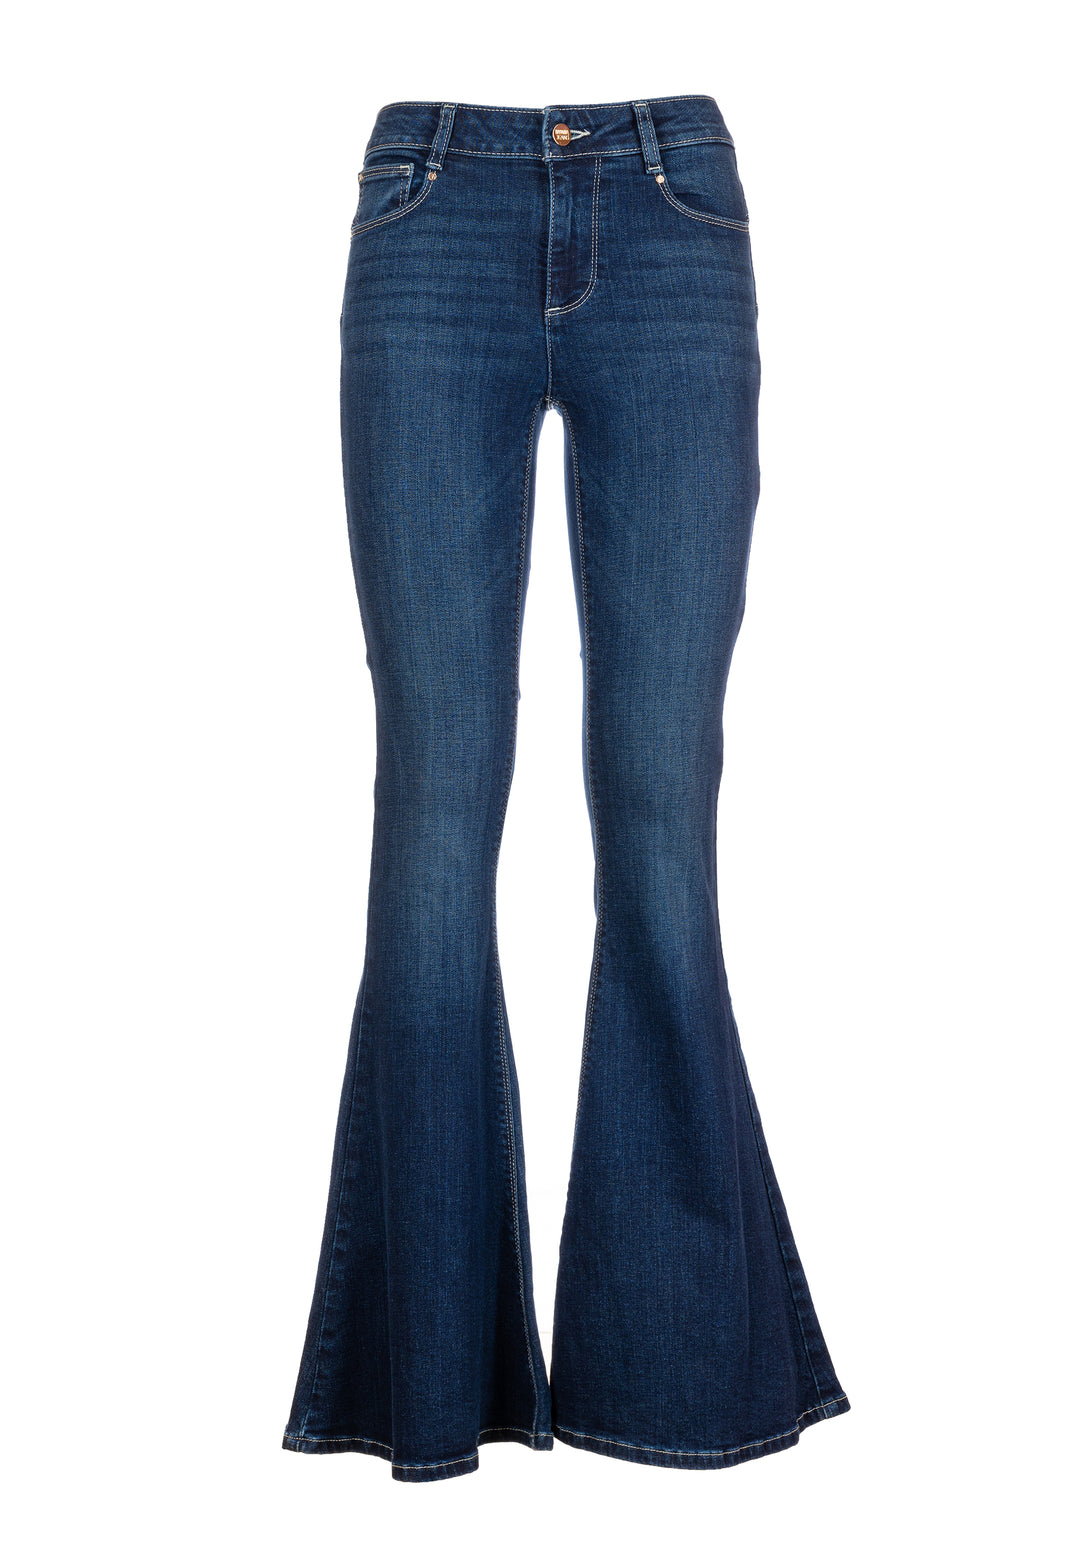 Jeans flare with push up effect made in denim with middle wash ...